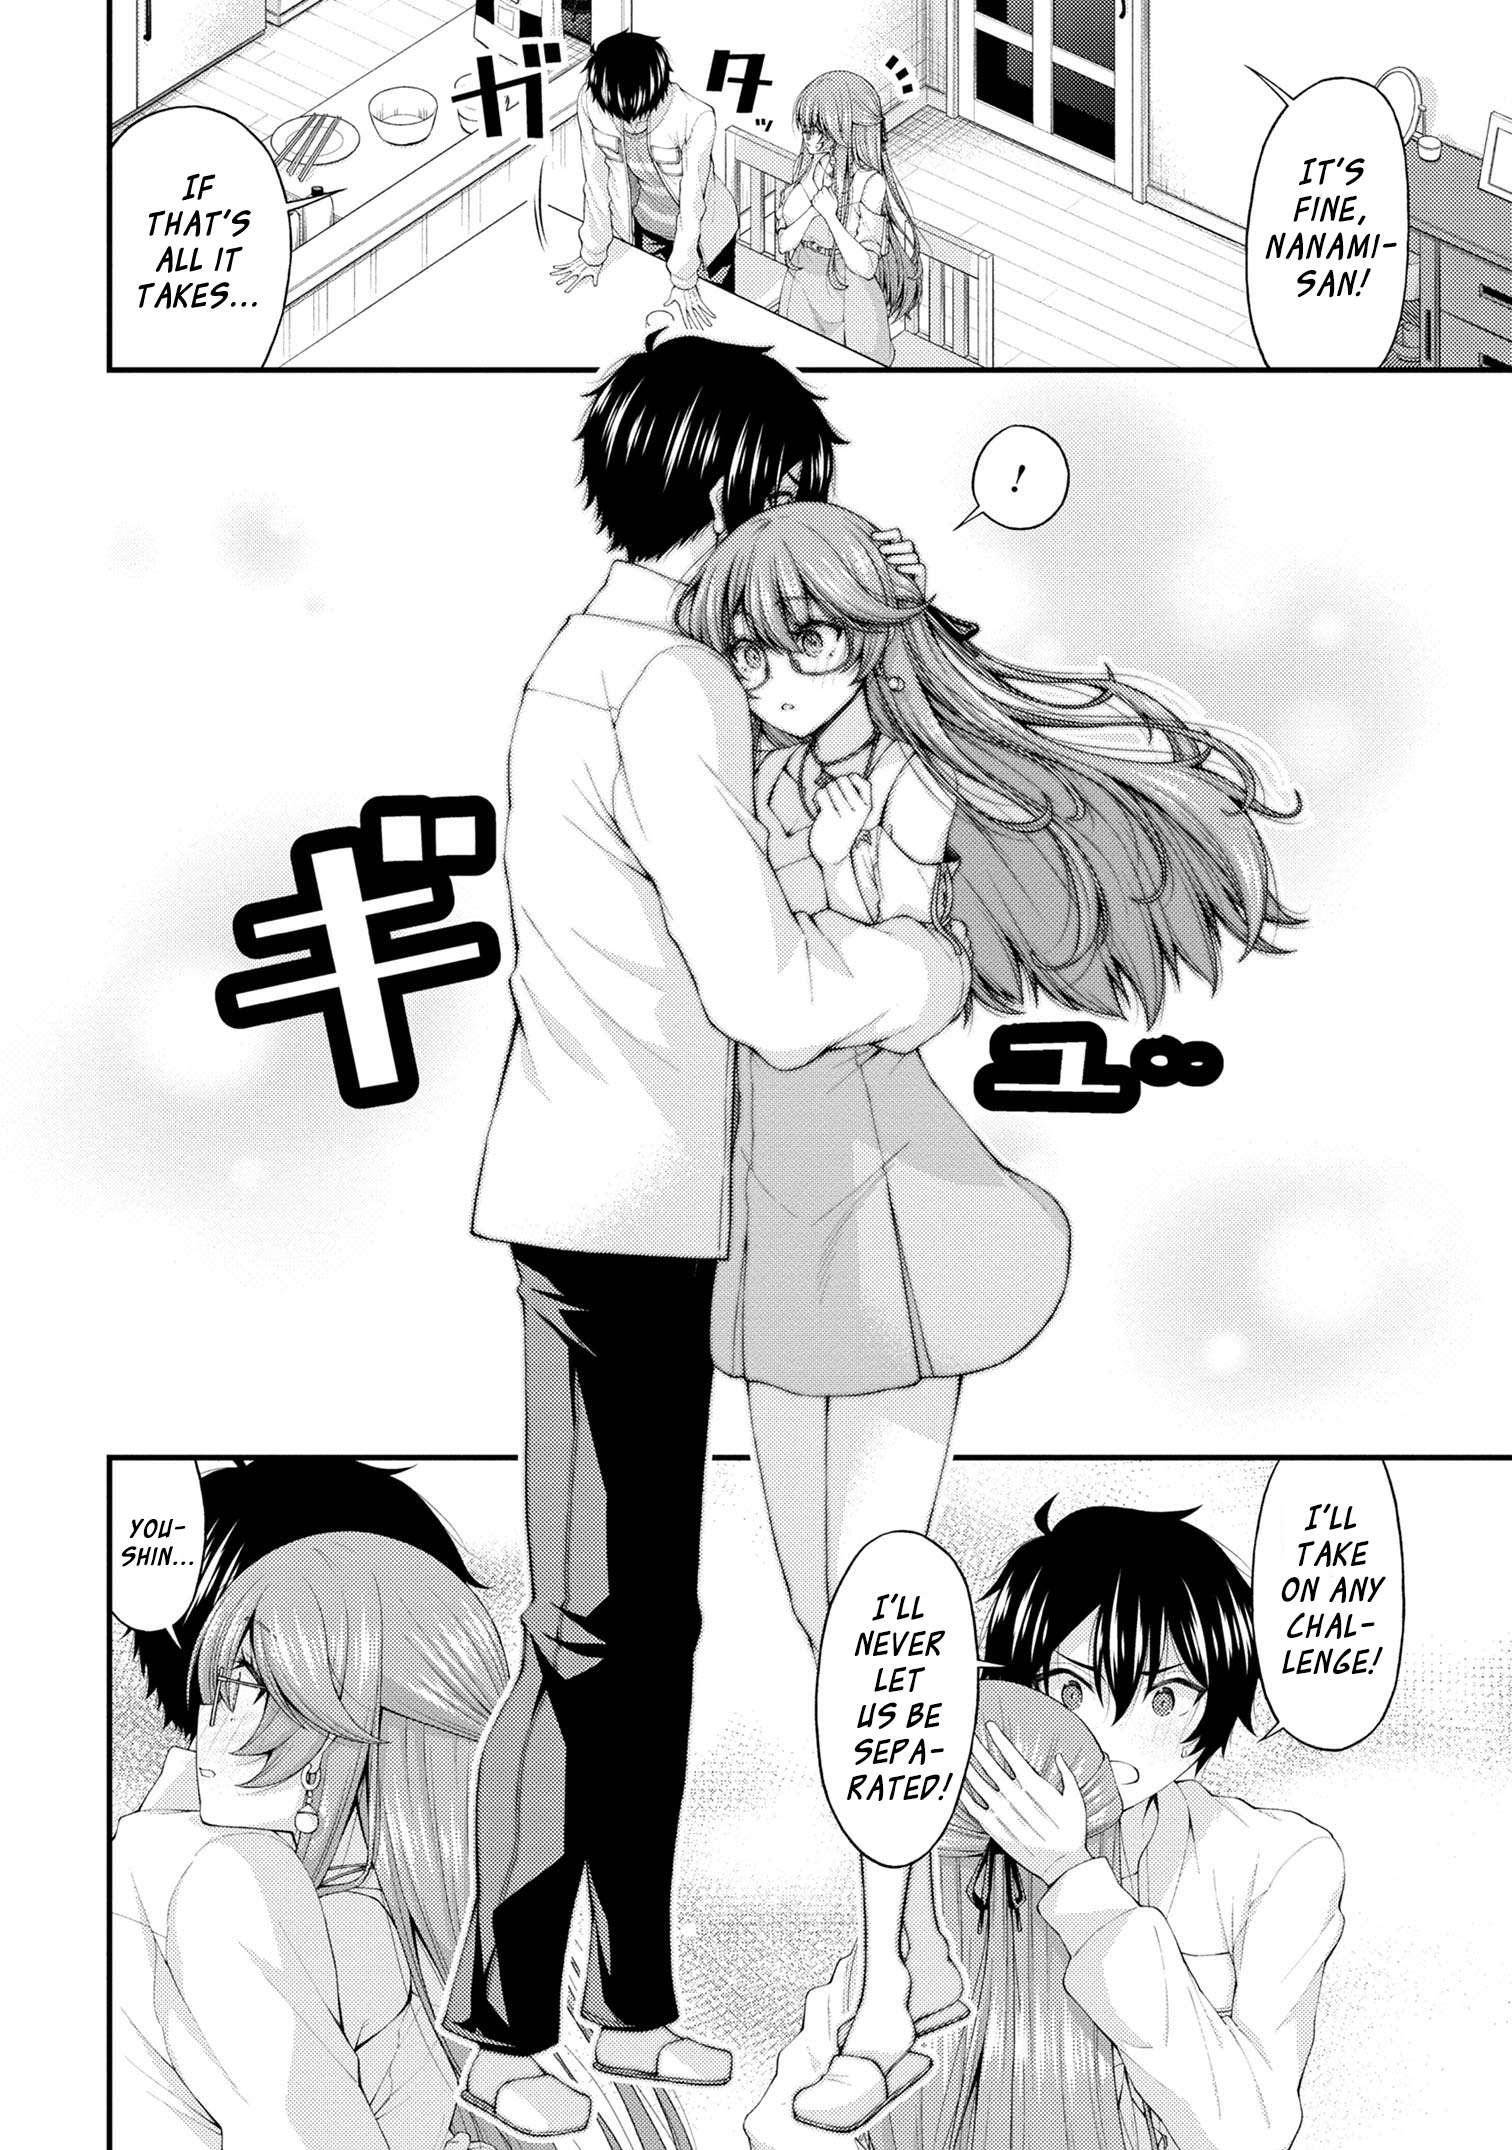 The Gal Who Was Meant to Confess to Me as a Game Punishment - chapter 12 - #6